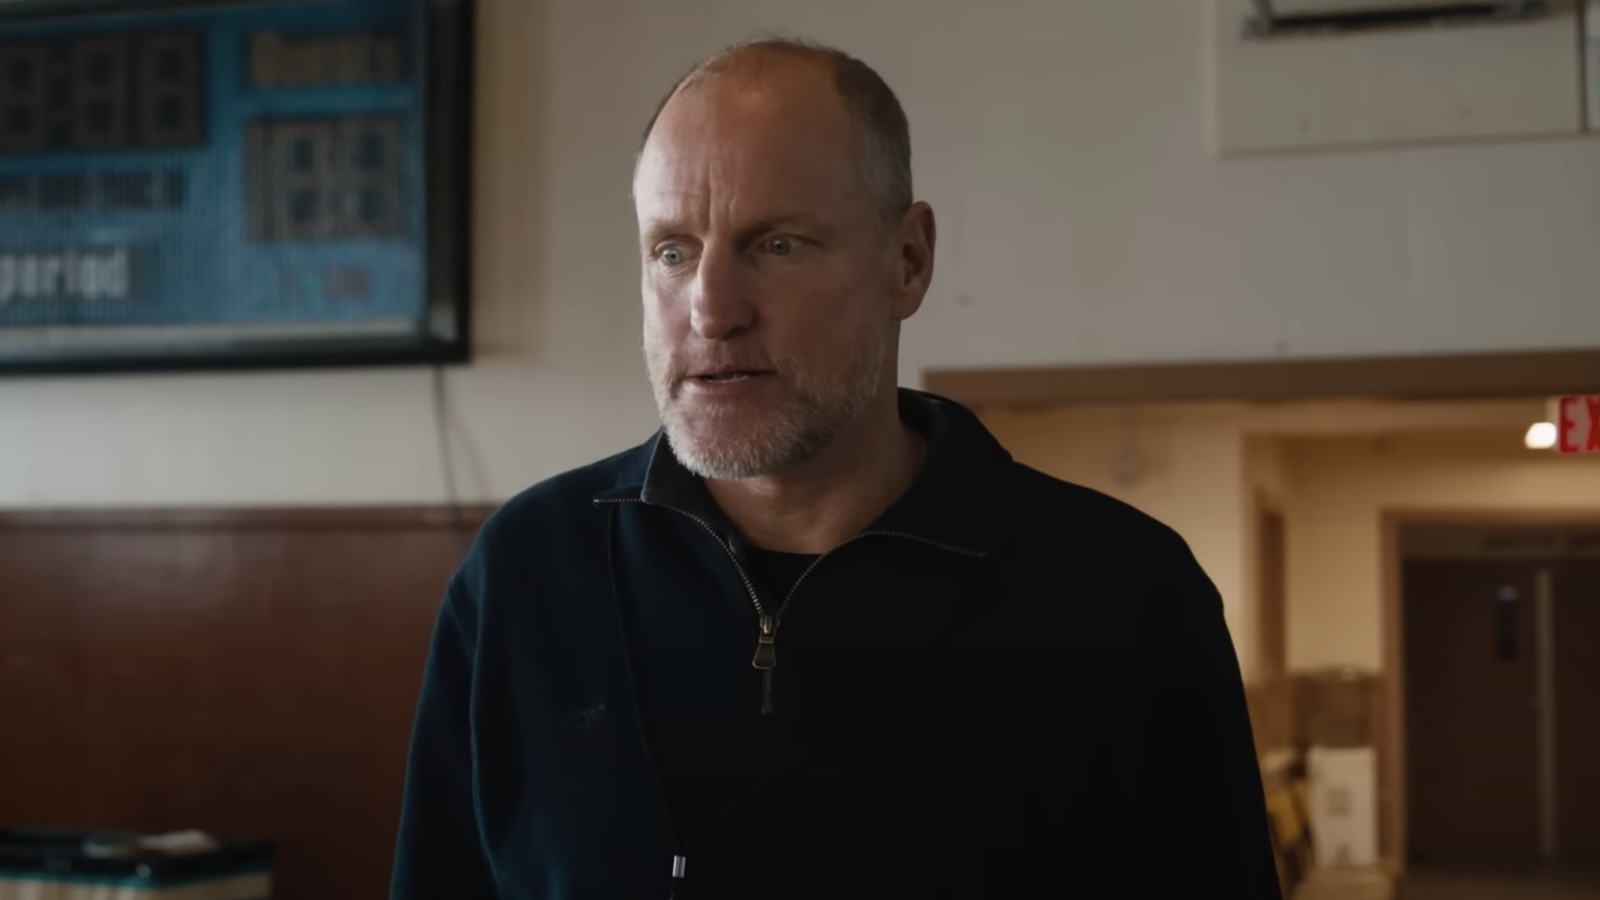 Reel Theatre - Woody Harrelson stars in the hilarious and heartwarming  story of a former minor-league basketball coach who is court ordered to  manage a team with intellectual disabilities. 🎥🏀🍿 See you